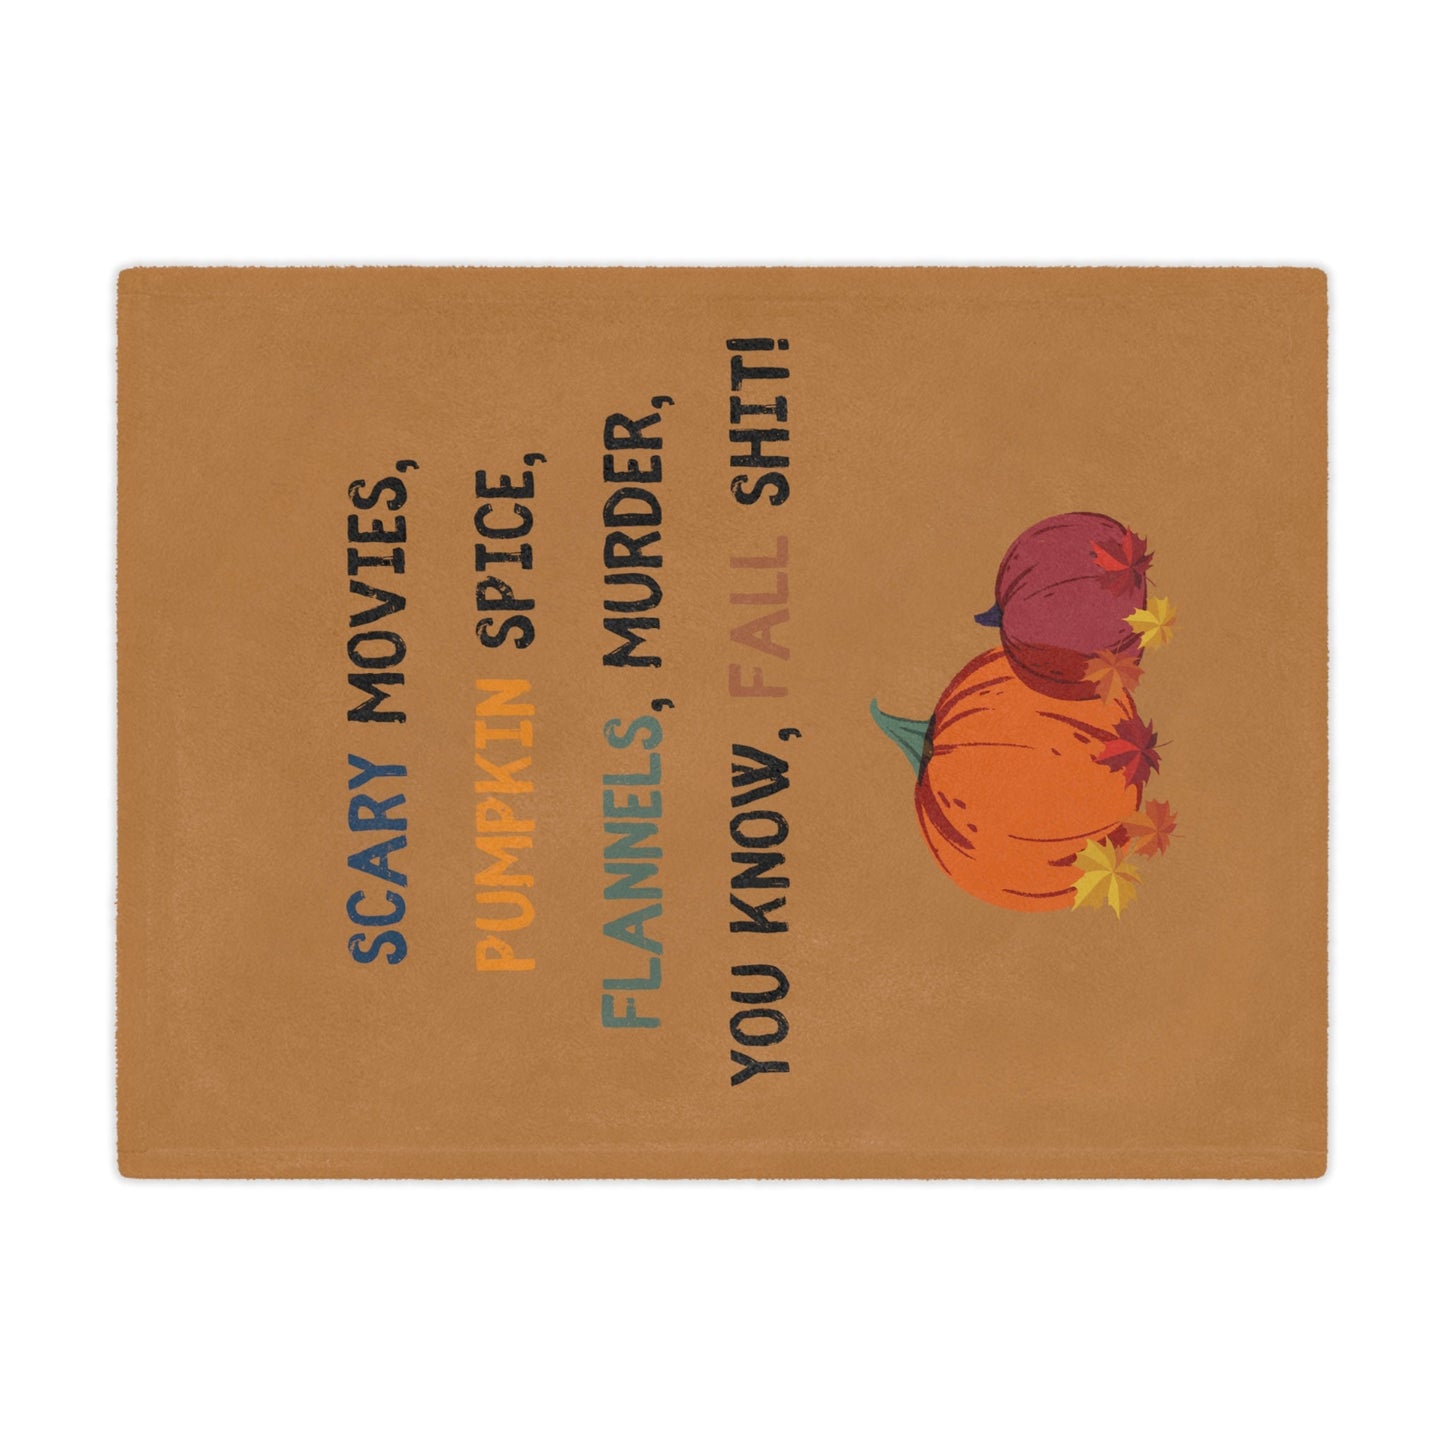 Get trendy with Fall Sh#t Blanket - Home Decor available at Good Gift Company. Grab yours for $29.95 today!